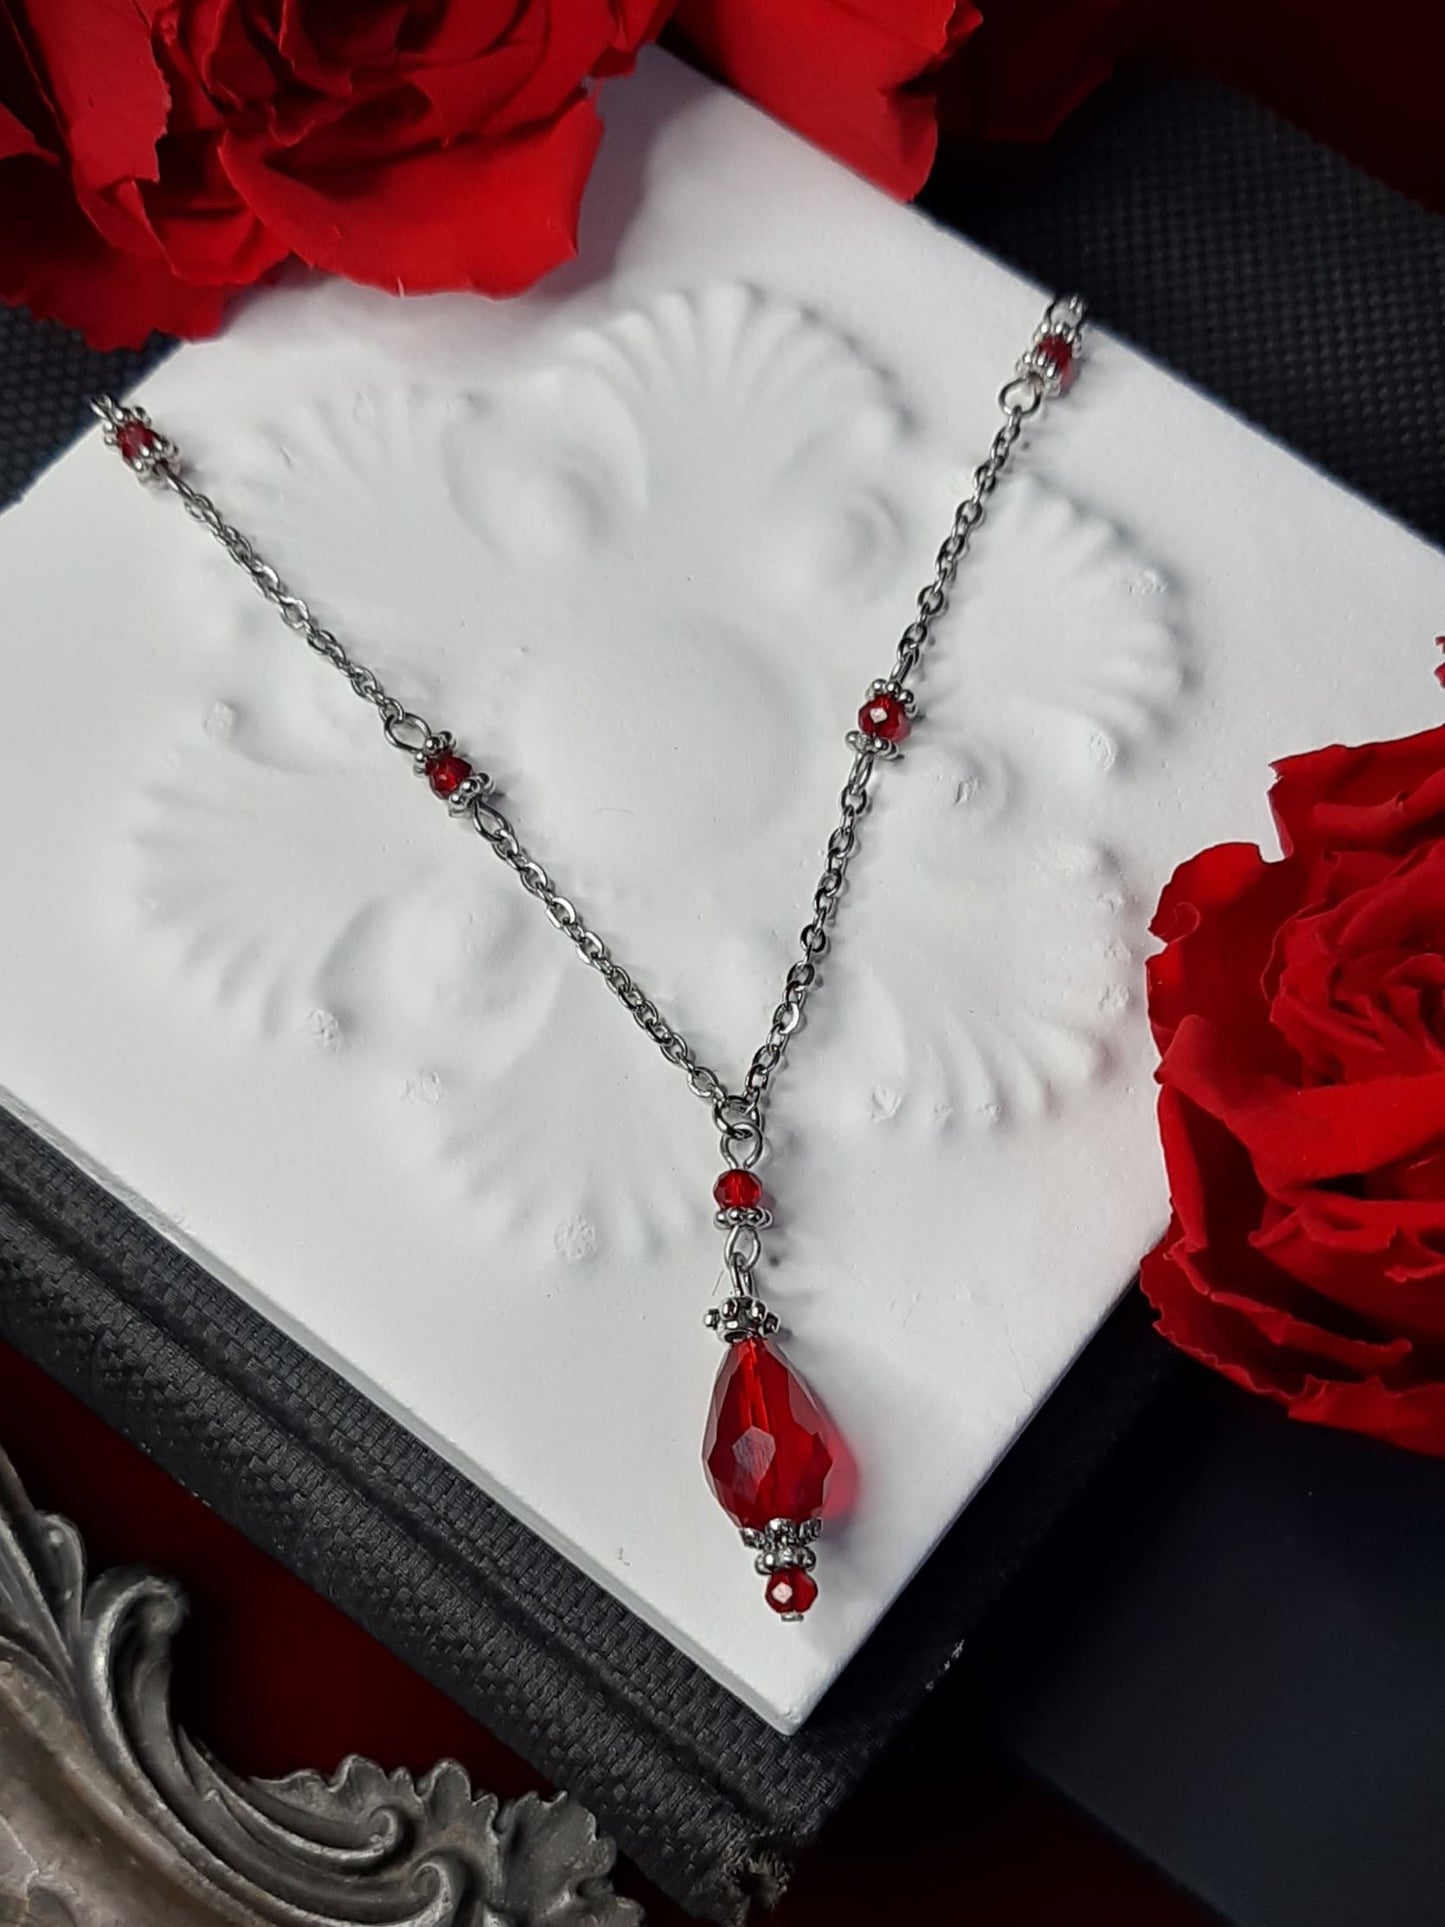 𝕯𝖊𝖘𝖎𝖗𝖊 crystal necklace - Red